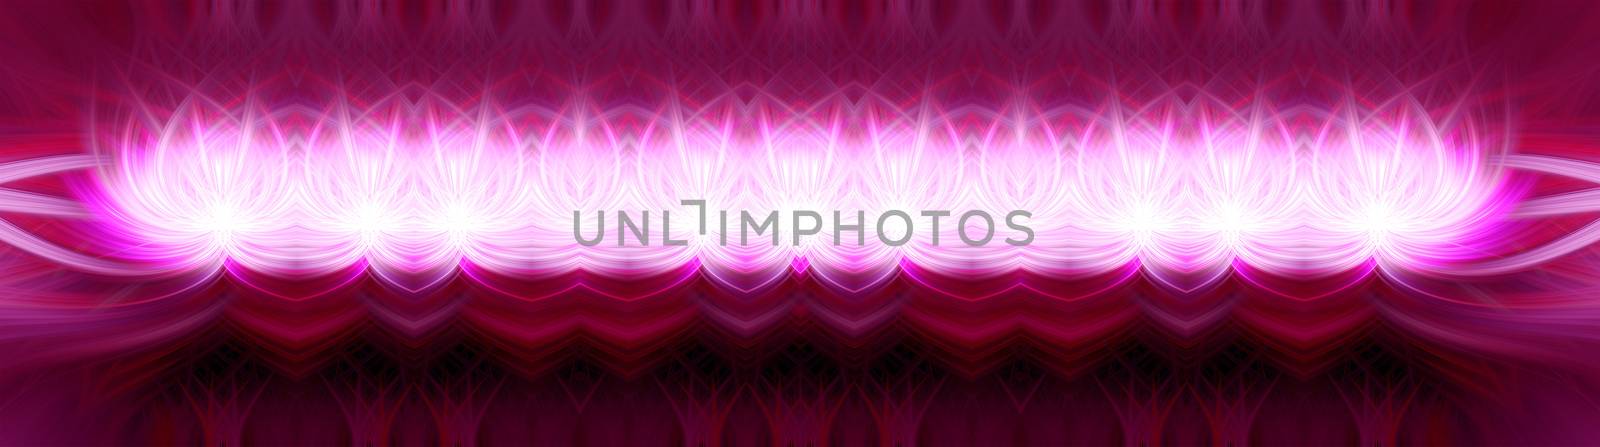 Beautiful abstract intertwined 3d fibers forming a shape of a flower or flame. Purple, red and pink colors. Symmetrical illustration. Panorama and banner size.